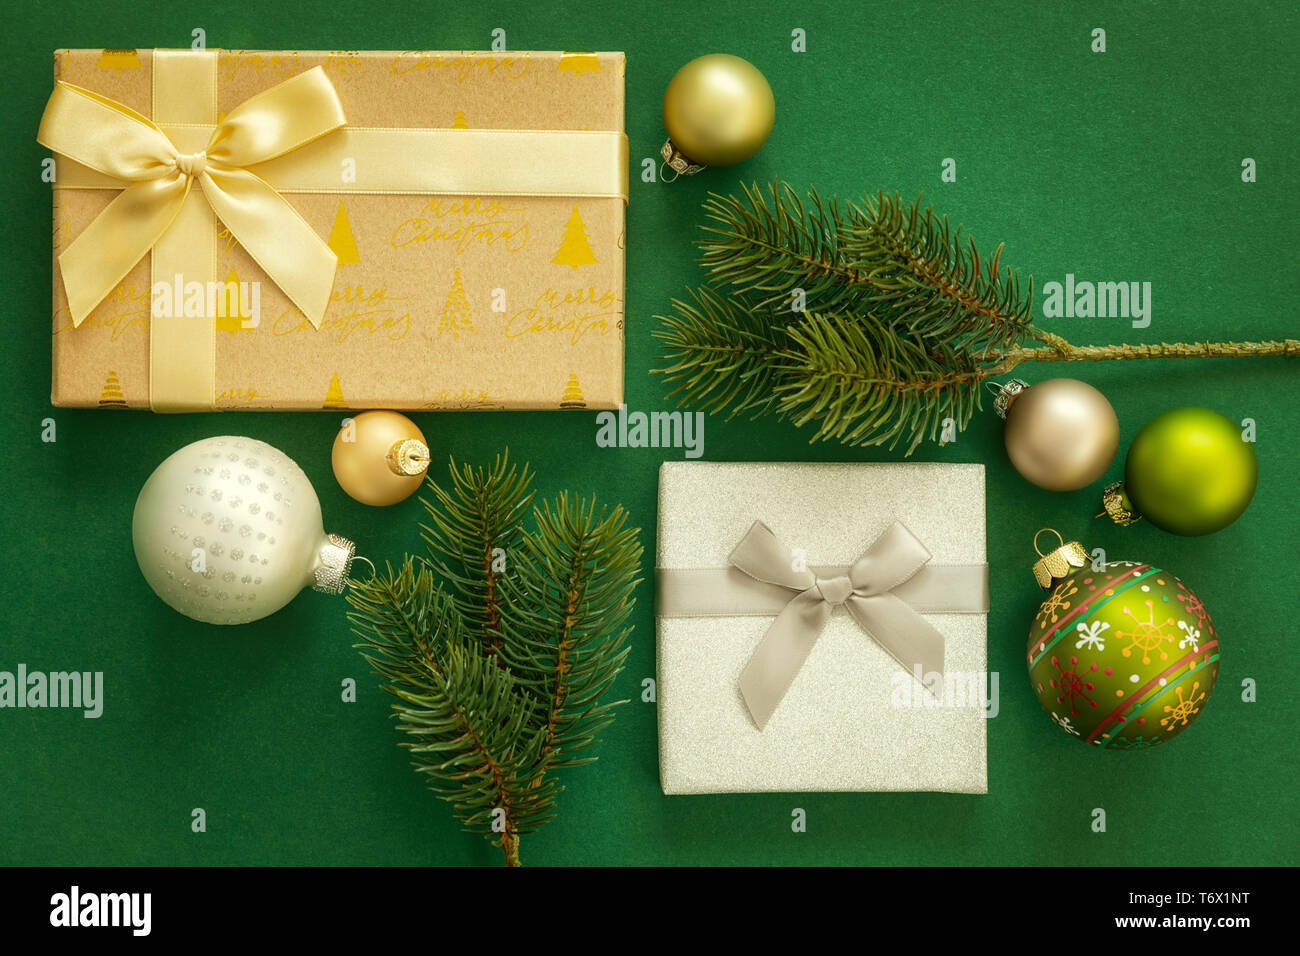 Christmas decoration background green with gift box Stock Photo